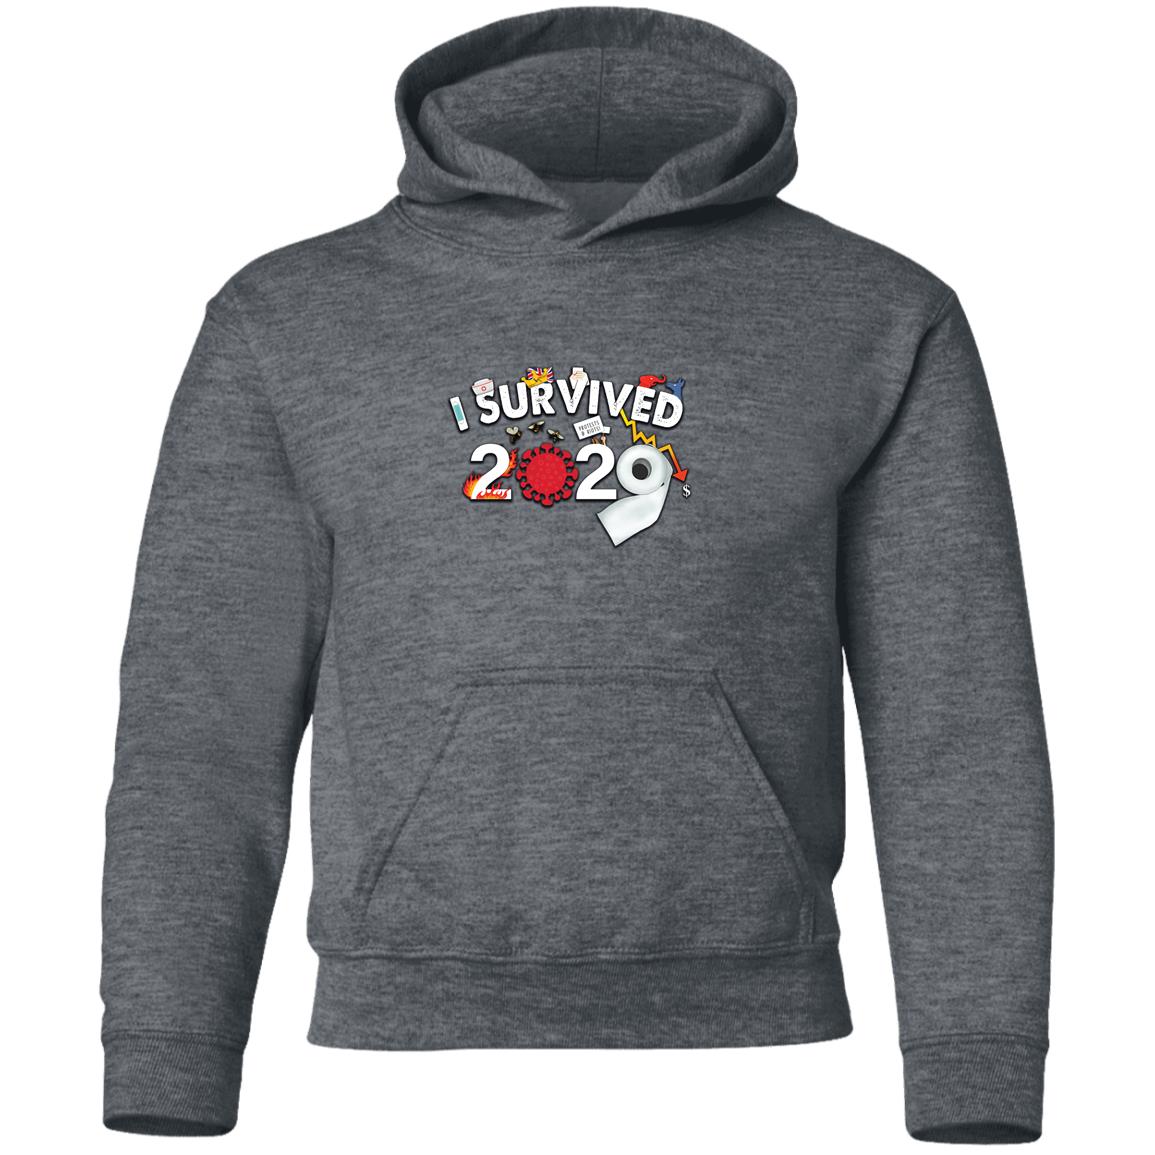 I Survived 2020 - Youth Pullover Hoodie